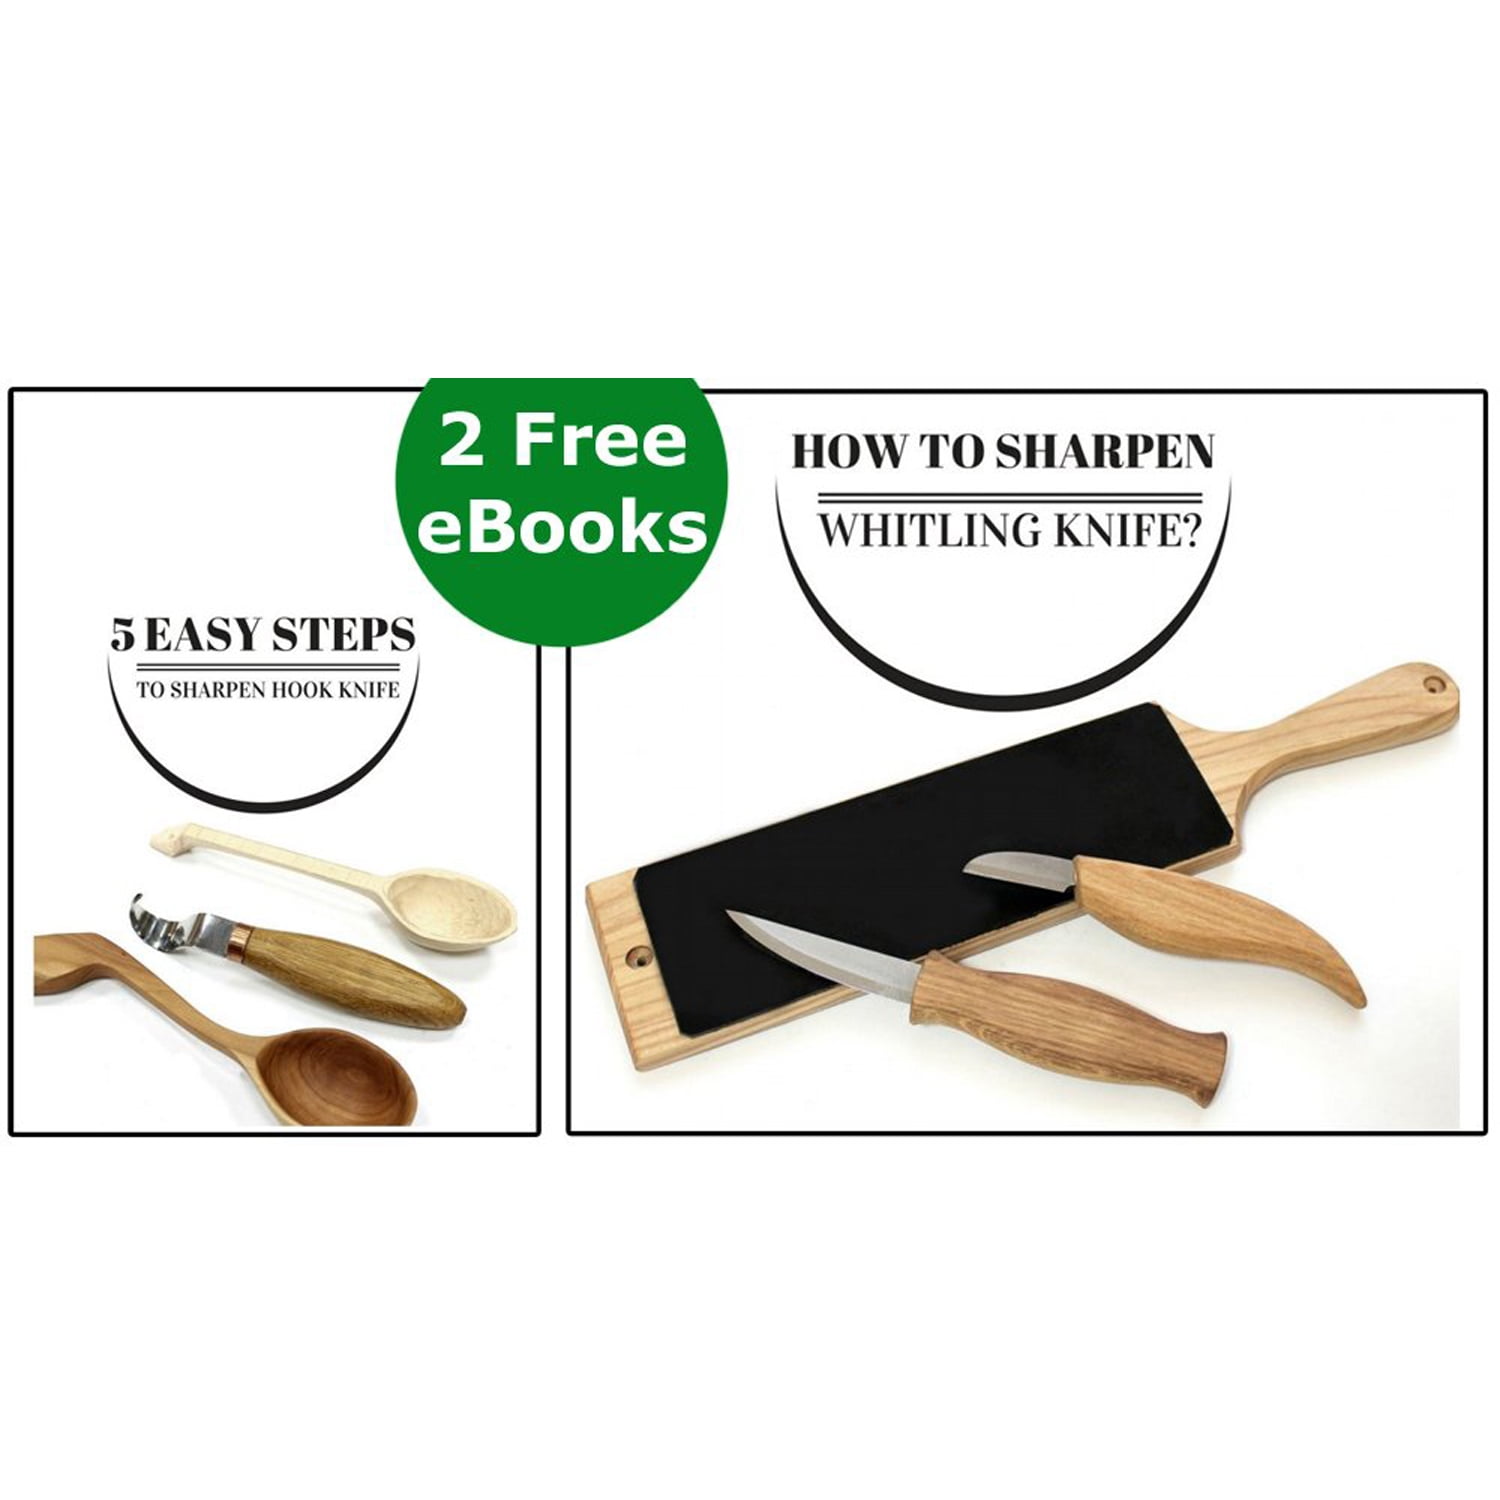 BeaverCraft Deluxe Wood Carving Kit S18X - Wood Carving Knife Set - Spoon  Carving Tools Set - Whittling Knives Kit - Woodworking Kit Wood Carving Tools  Kit Large Whittling Kit S18X